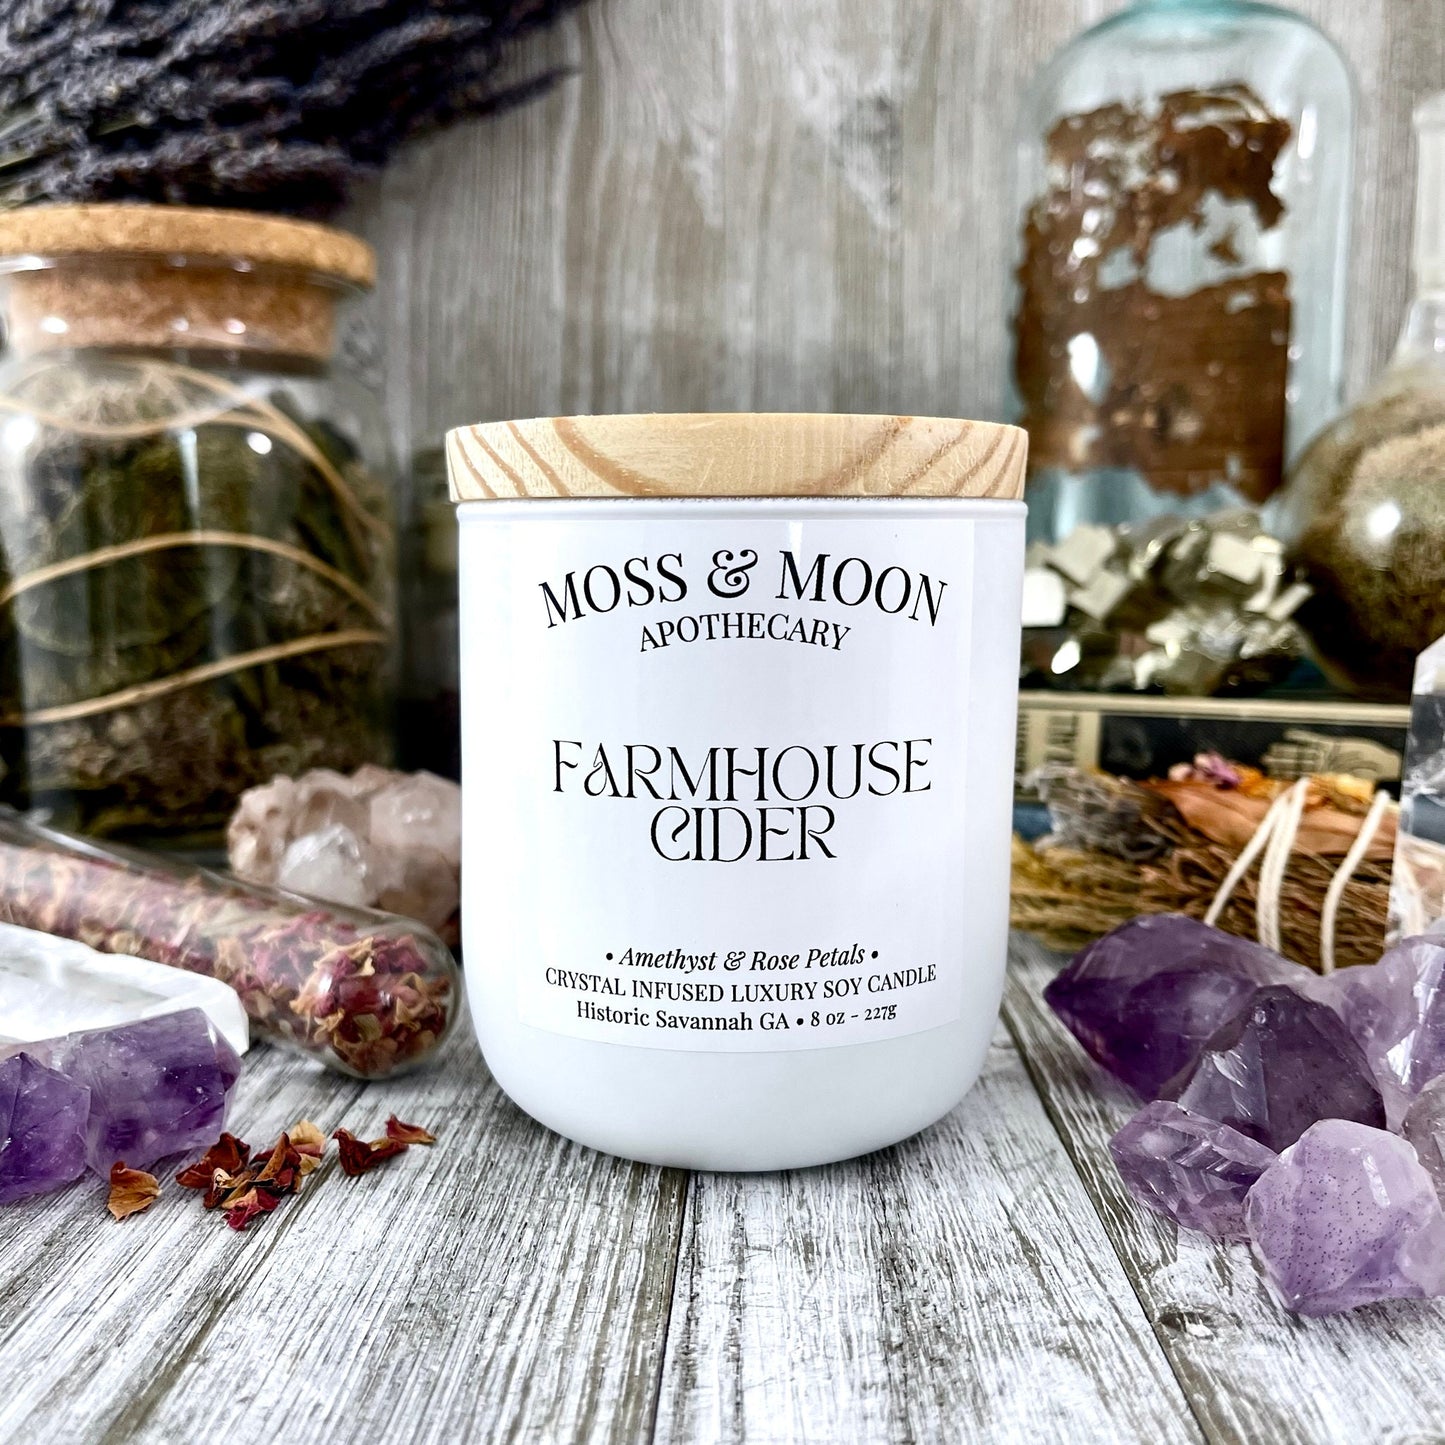 amethyst candle, Apple Cider Candle, aromatherapy candle, Candles, Candles & Holders, Container Candles, crystal candle, Crystal Candles, crystal healing, eco-friendly candle, Etsy ID: 1460014119, farmhouse cider, handmade candle, Home & Living, Home Deco